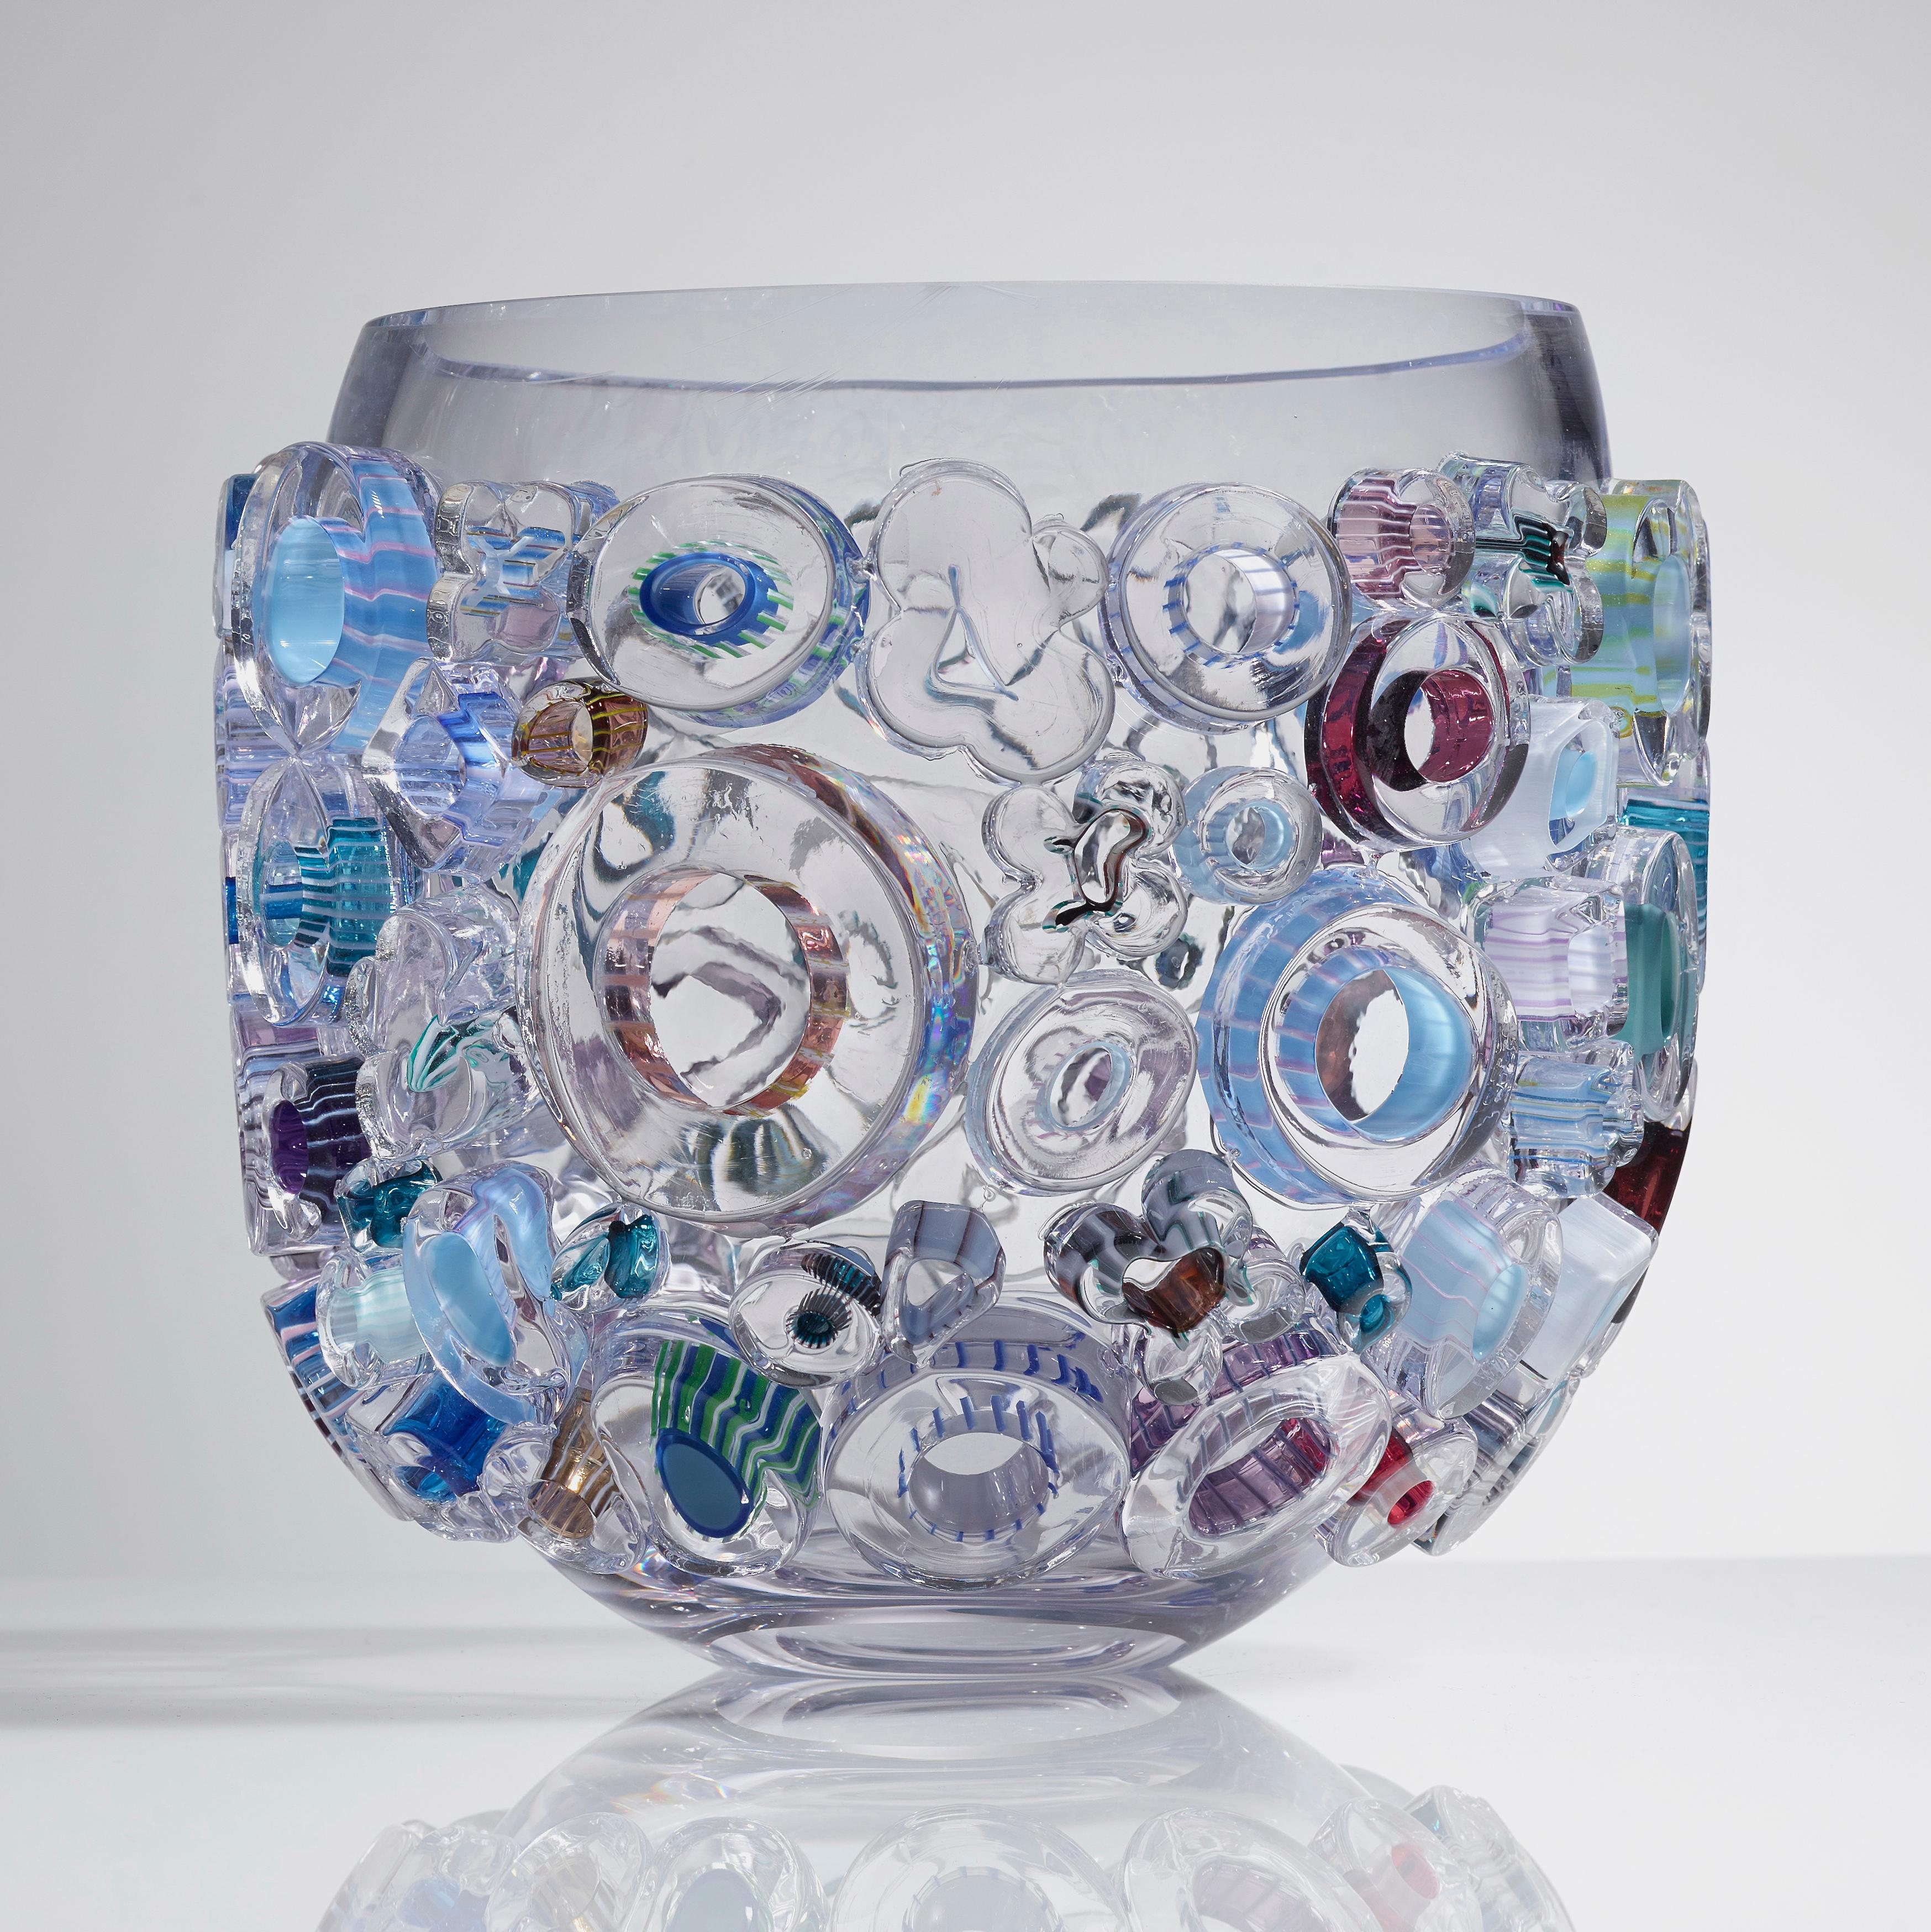 Little Common Ray Blue is a unique handblown and crafted vase & artwork / bowl / centrepiece by the German artist, Sabine Lintzen. The initial inner form is free-blown in clear glass and adorned with various individually shaped murrini, all created